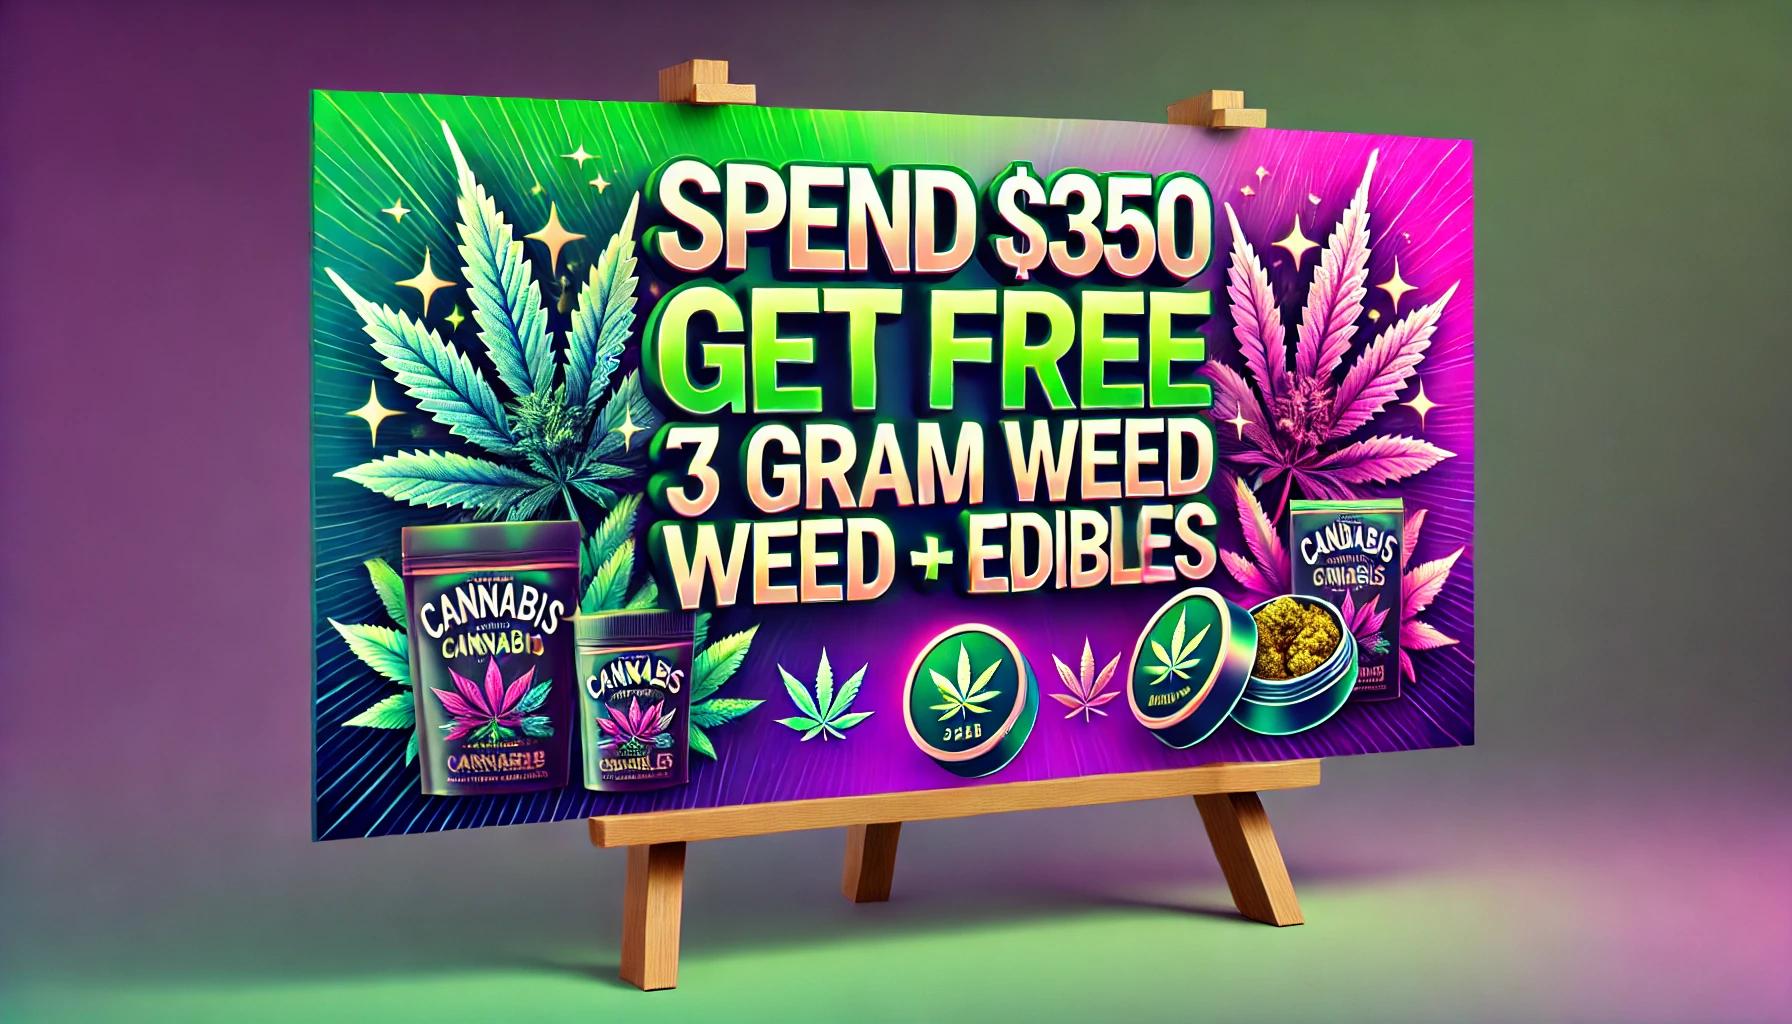 A vibrant and eye catching cannabis banner display (4)